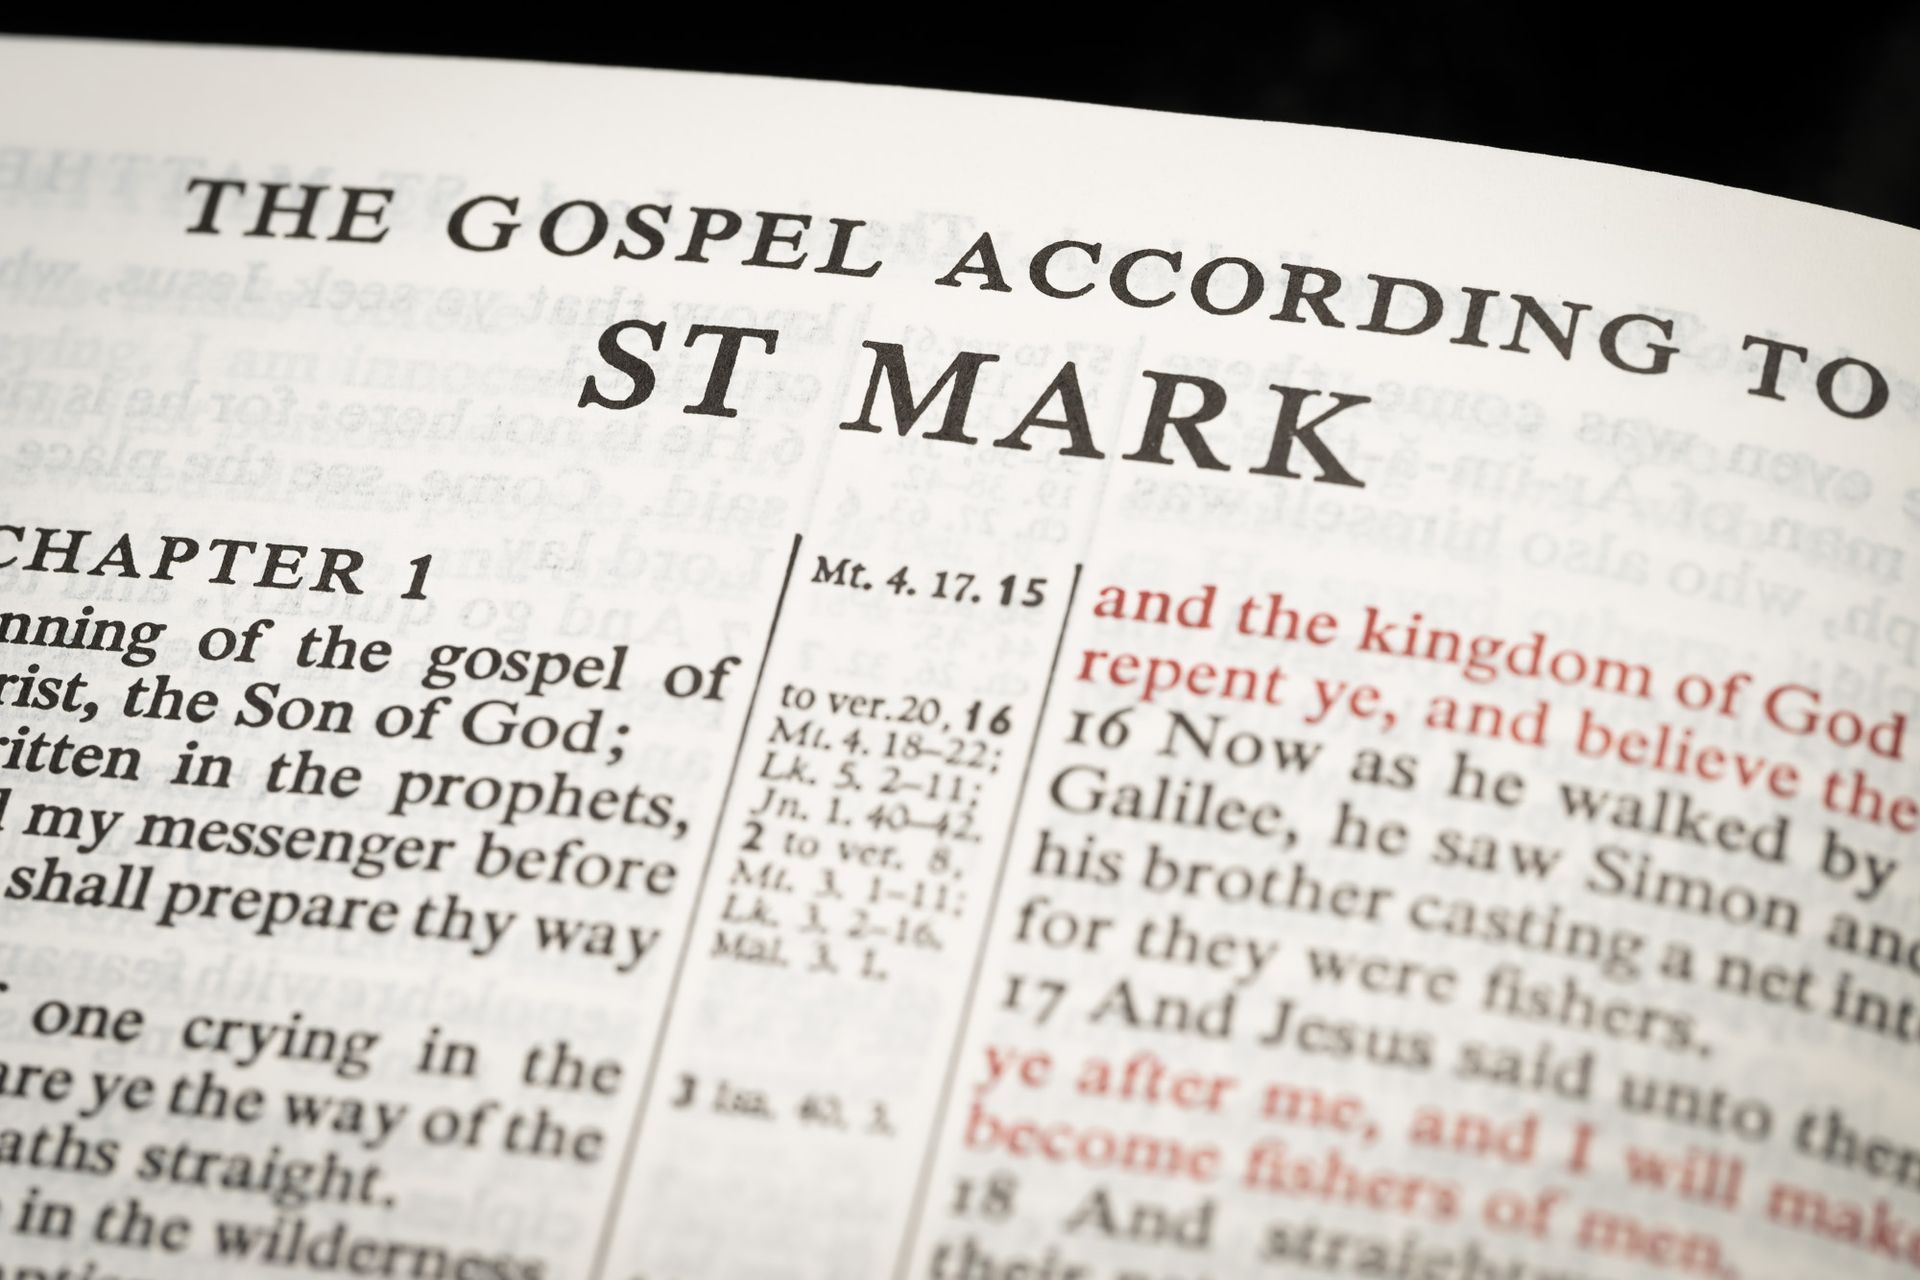 a bible is open to chapter 1 and the gospel according to st mark